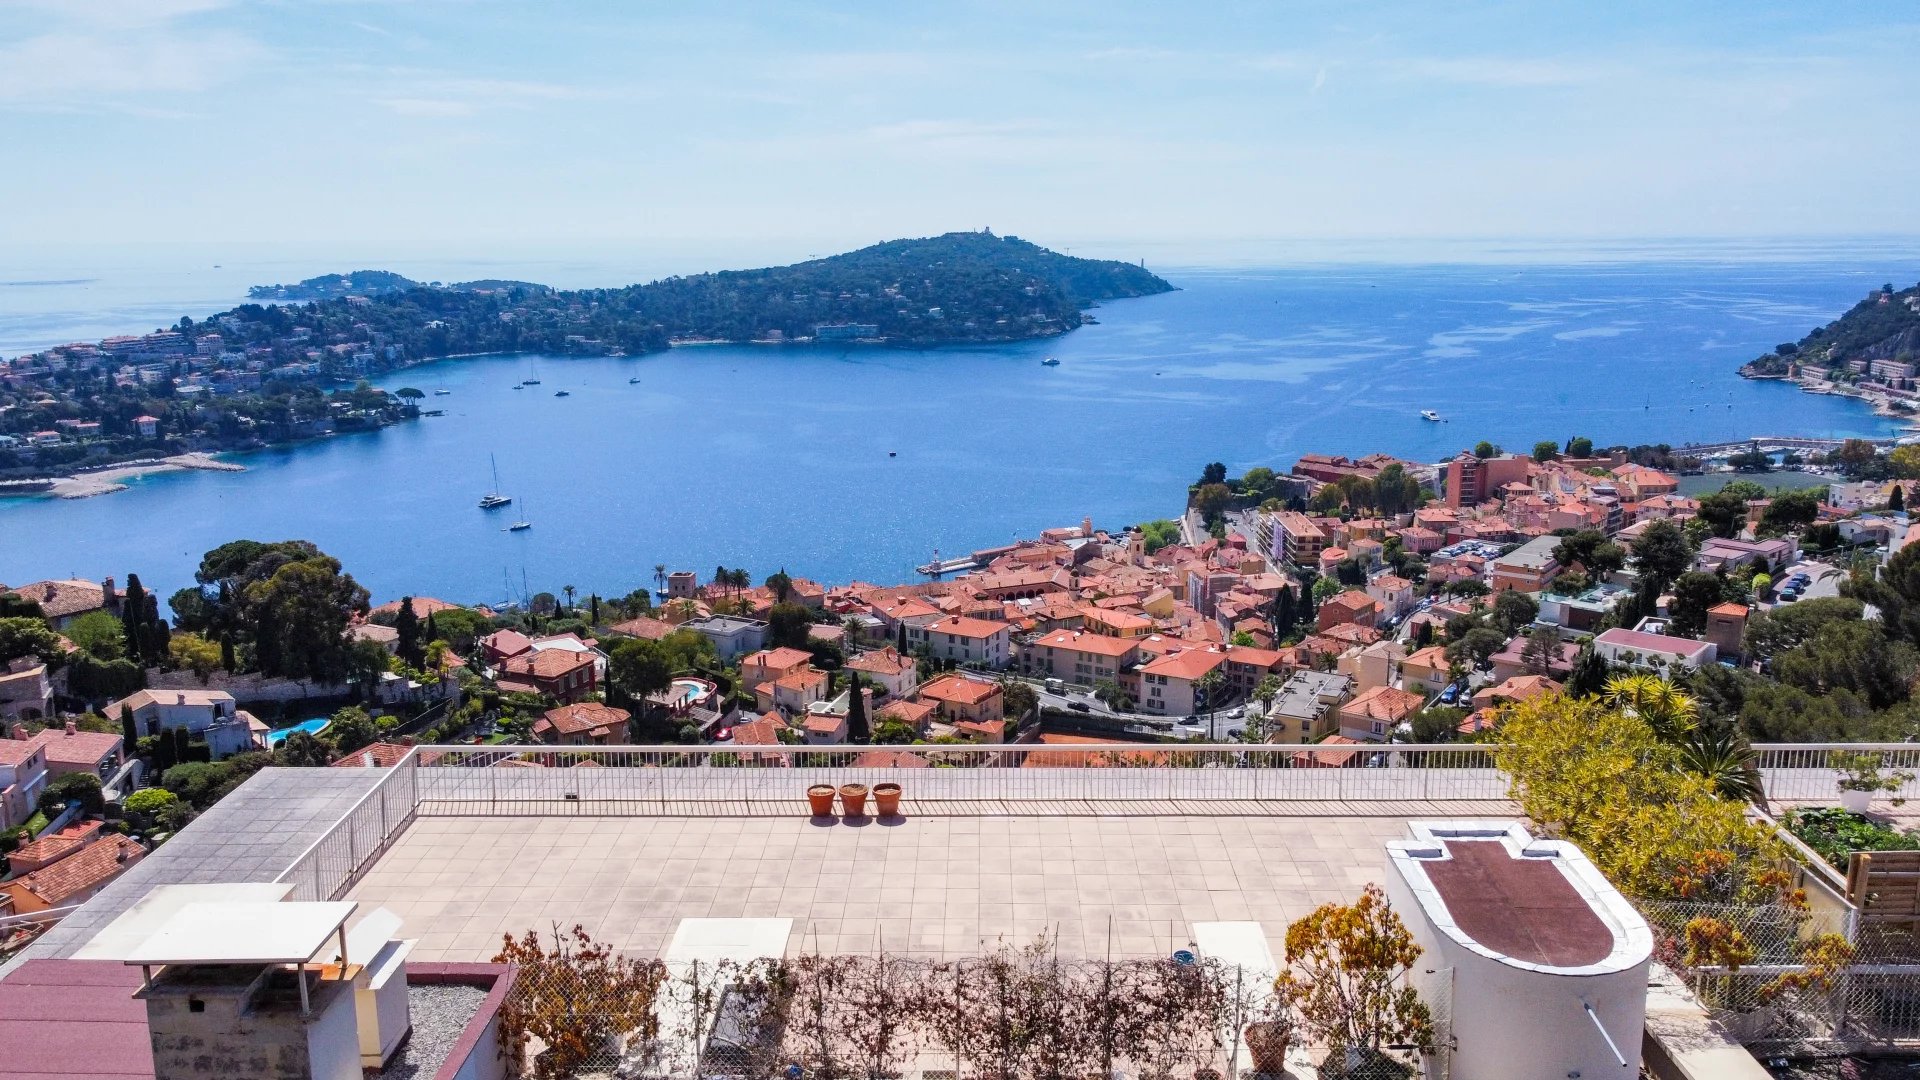 Villa on the roof with panoramic sea view - Villefranche sur mer